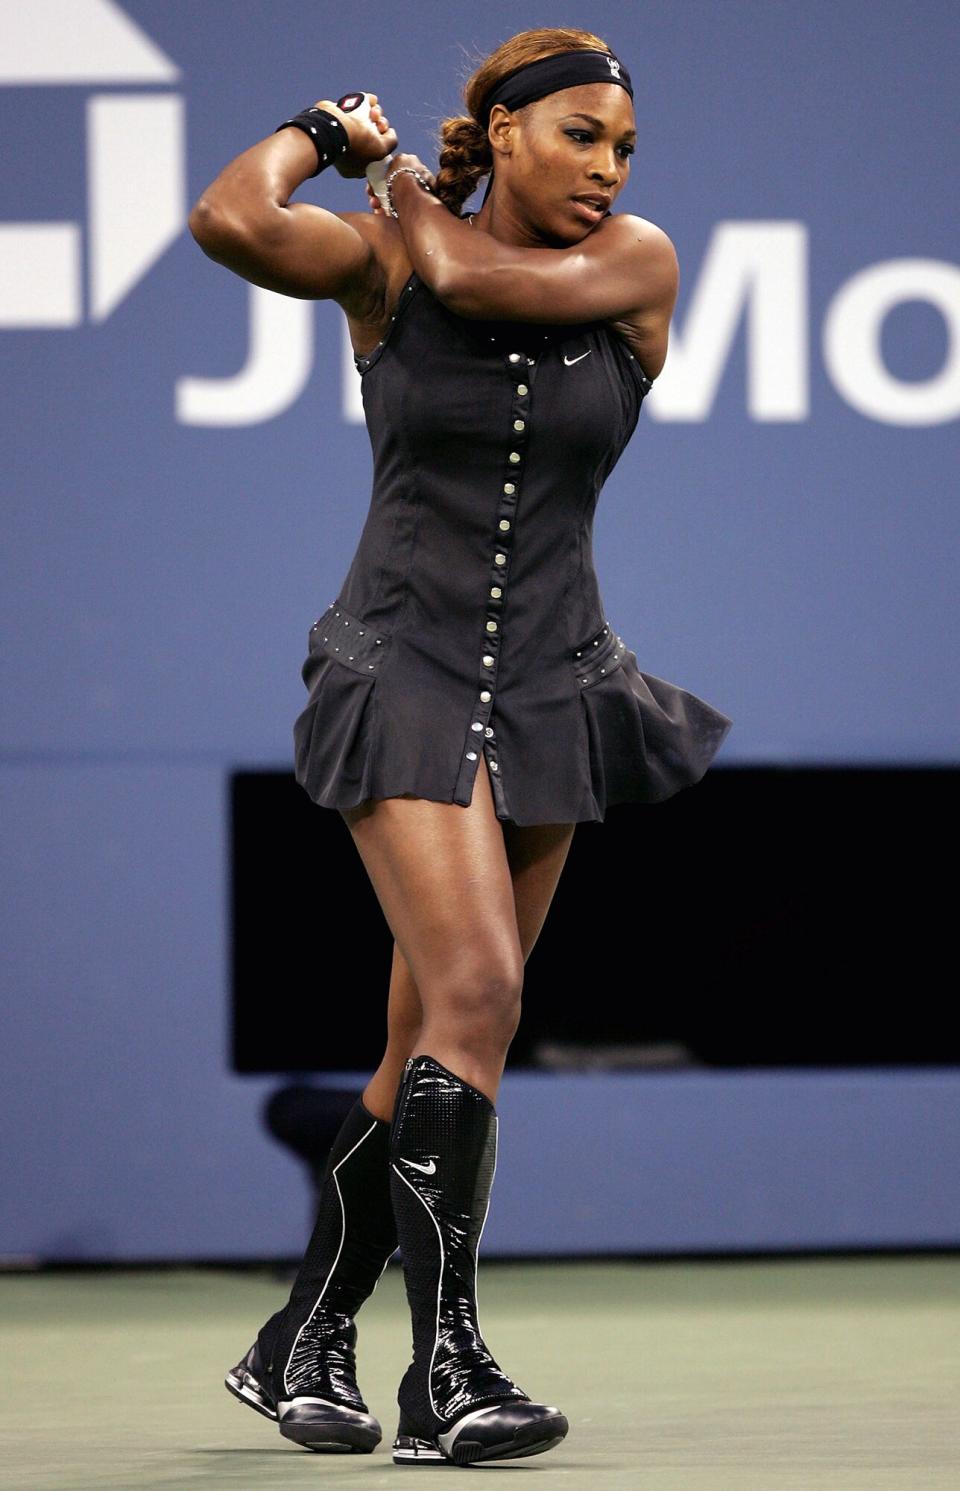 Serena Williams warms up prior to her match against Tatiana Golovin of France during the US Open at the USTA National Tennis Center in Flushing Meadows Corona Park on September 3, 2004 in the Flushing neighborhood of the Queens borough of New York